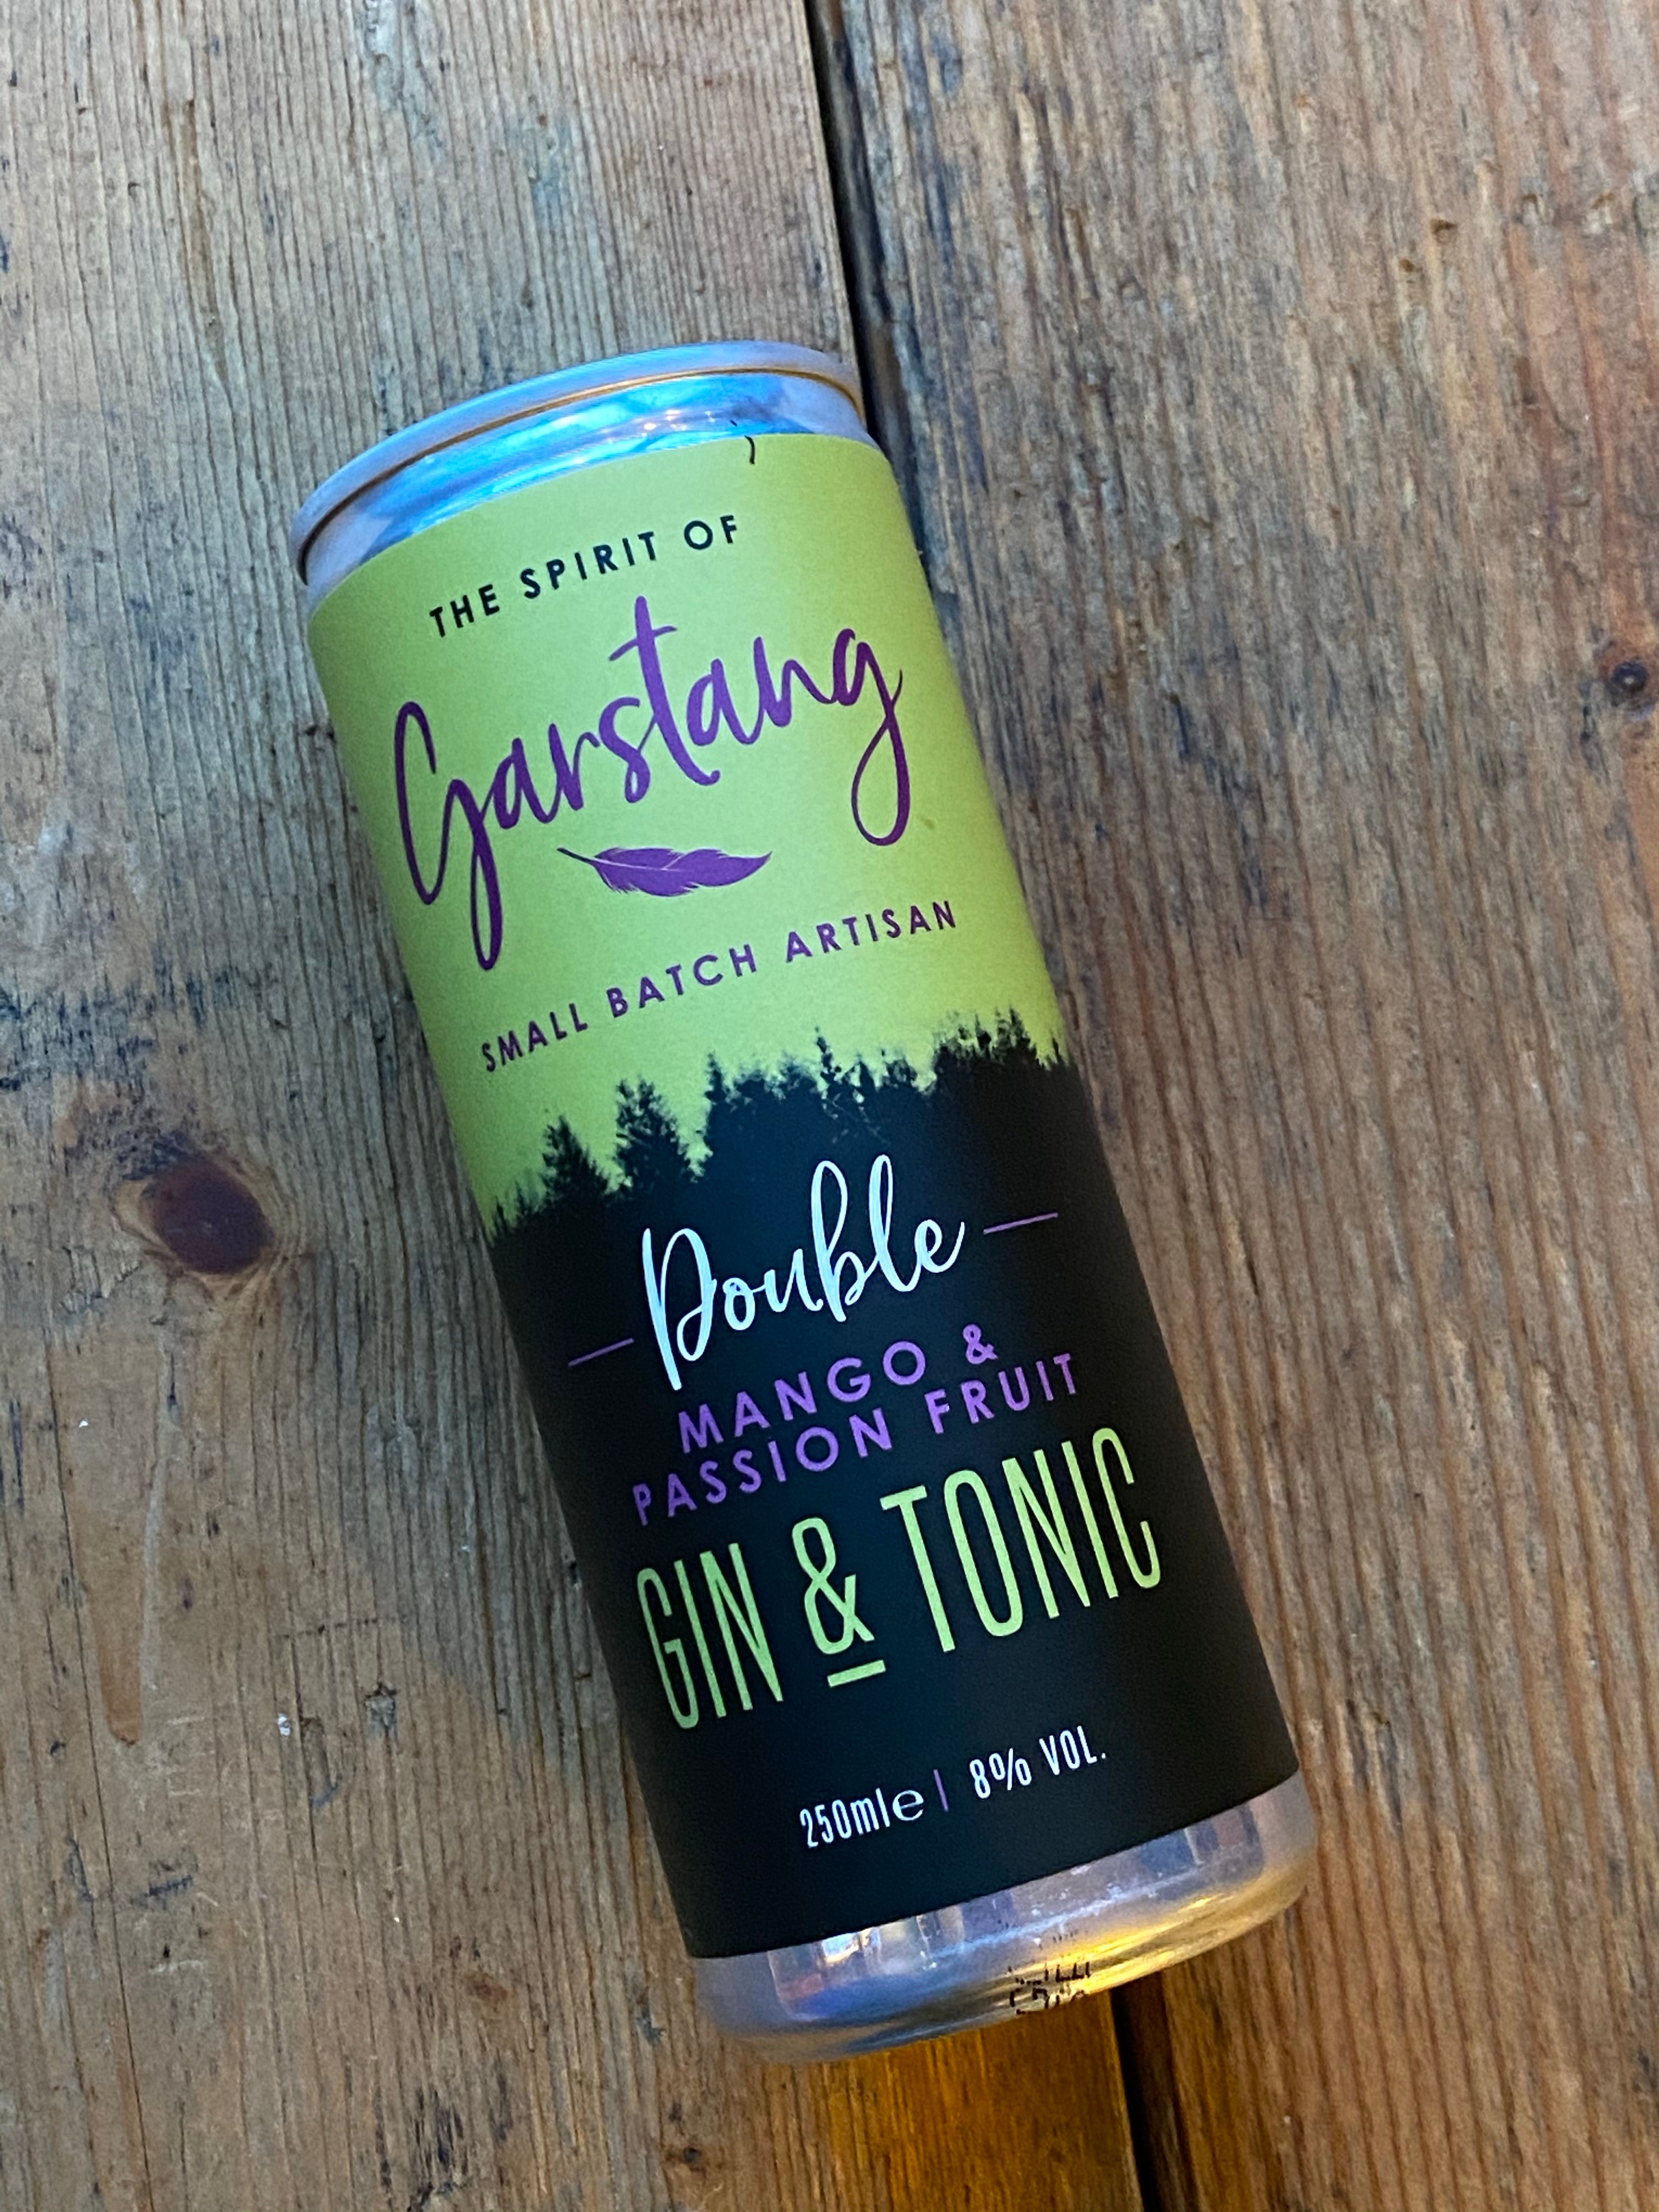 Garstang Gin and tonic cans